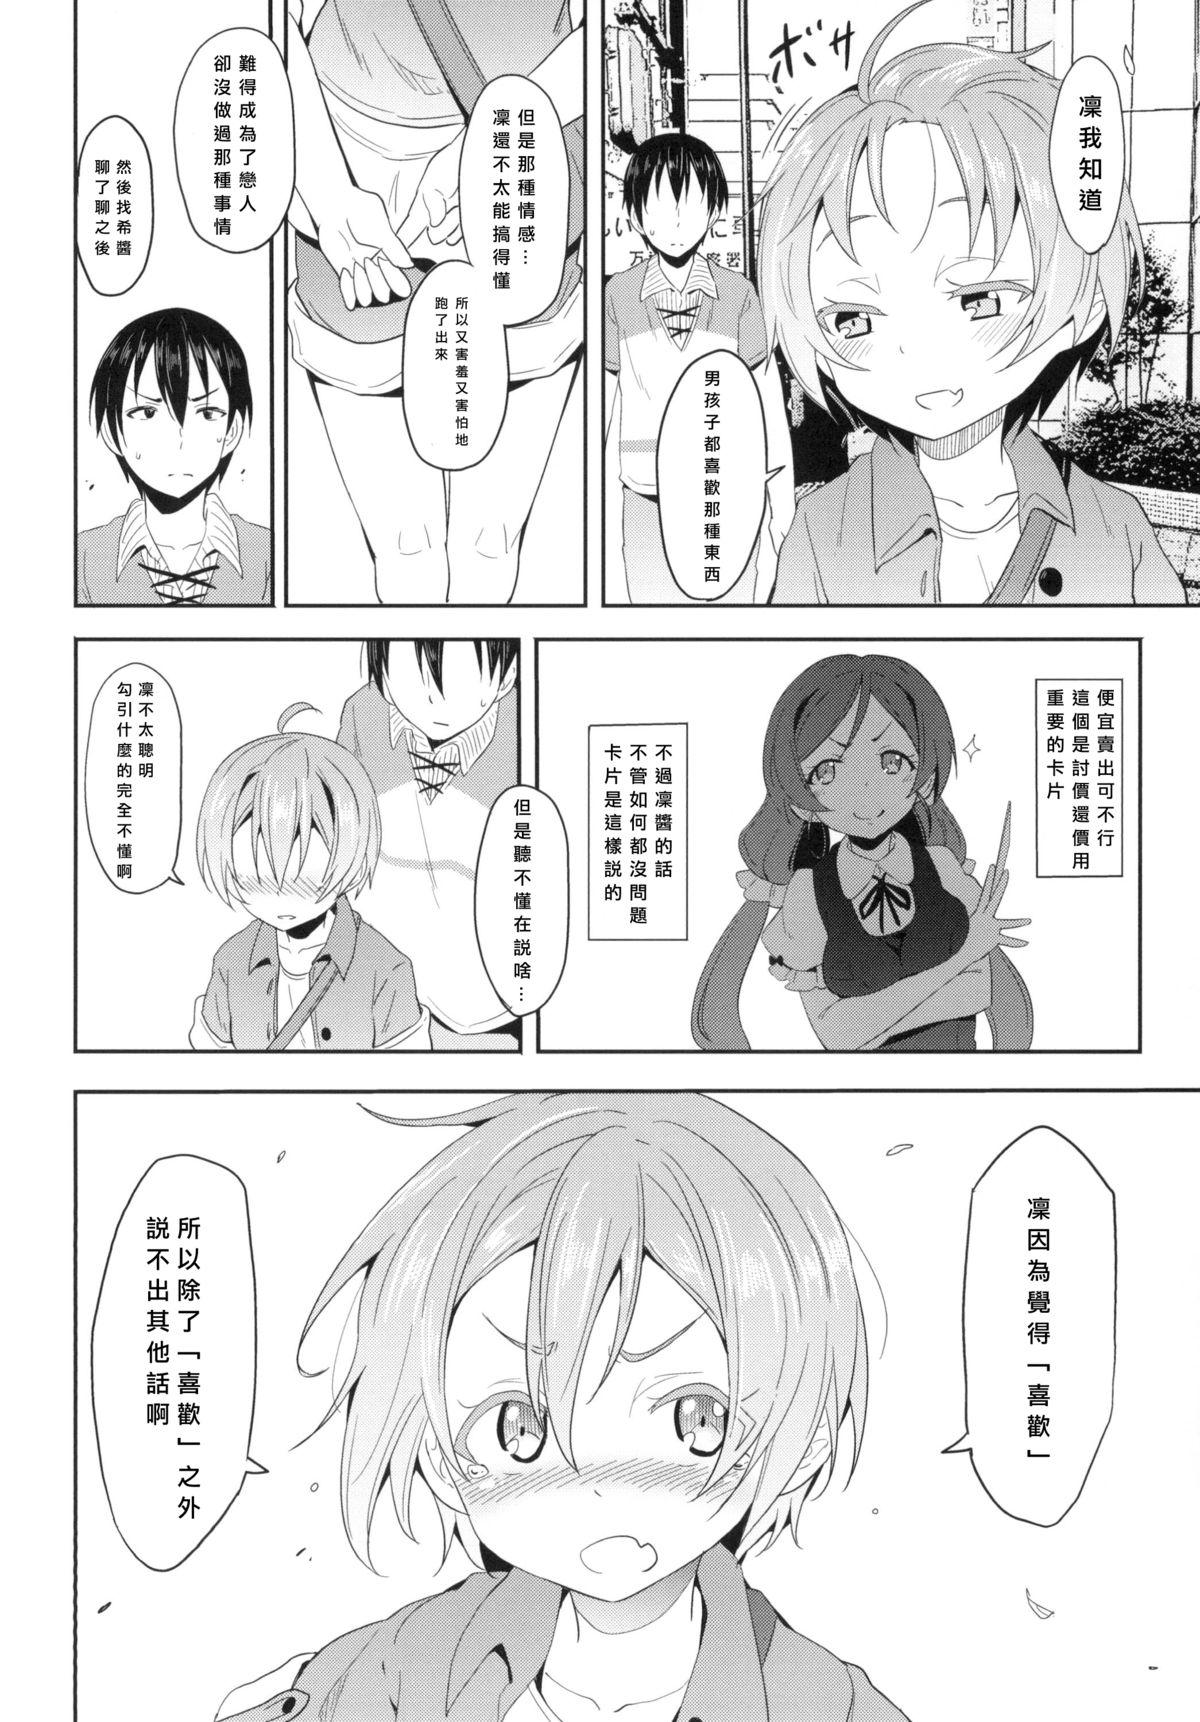 Fuck Porn Rin-chan to Issho. - Love live Milk - Page 6